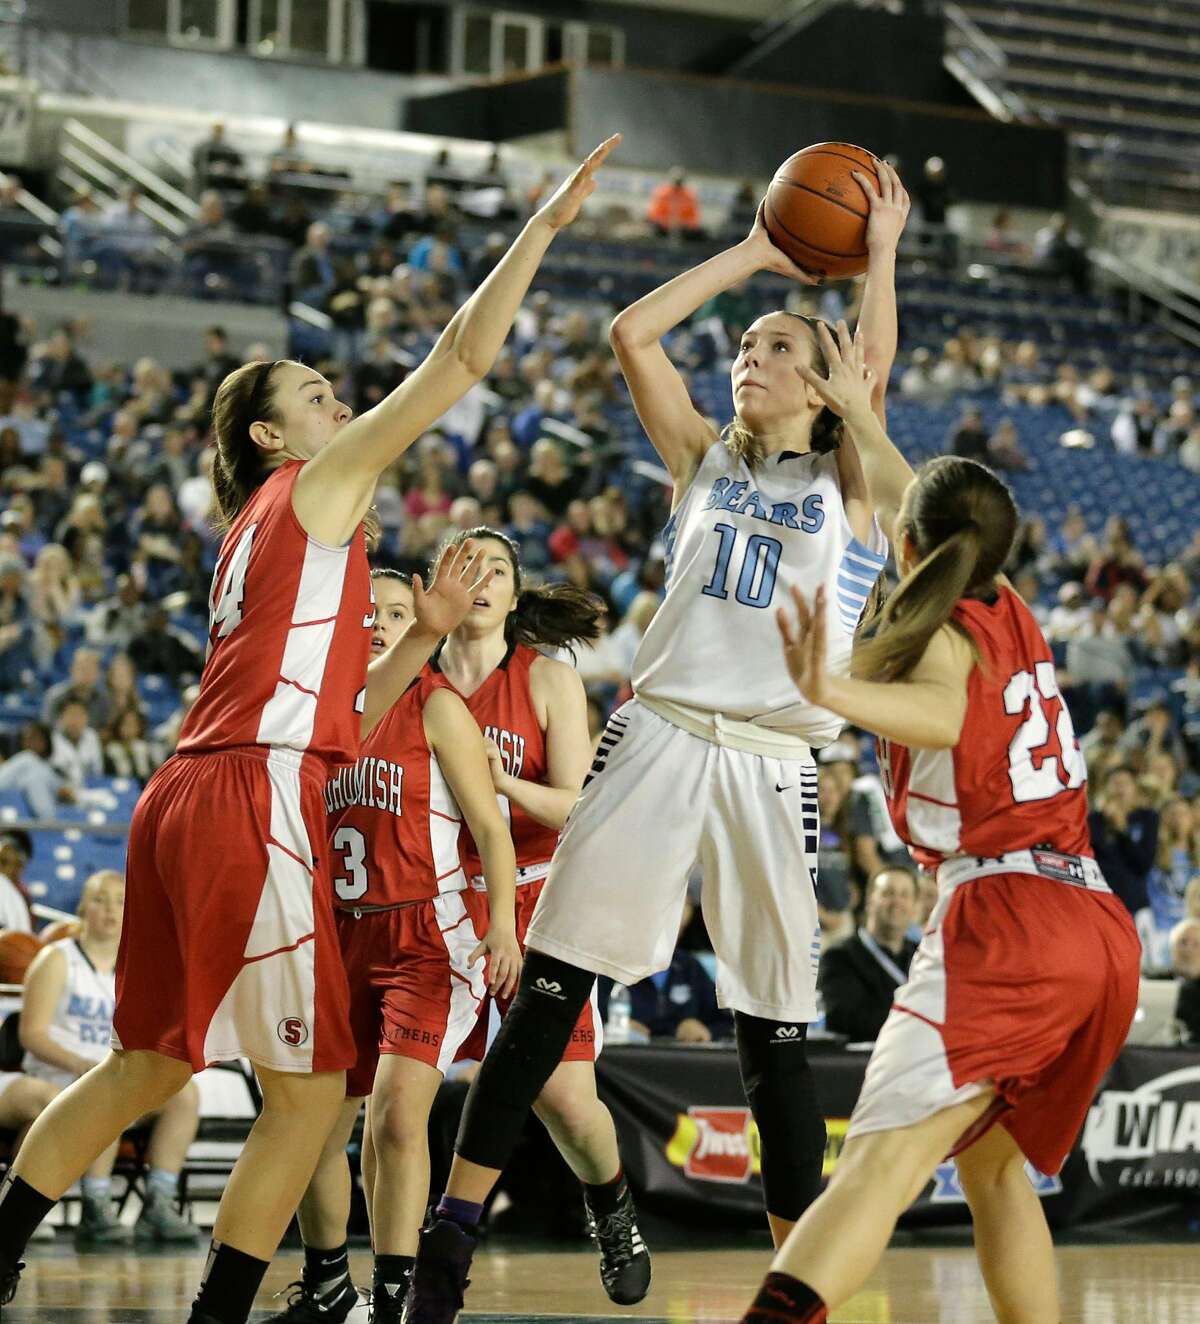 Central Valley's Lexie Hull (10) puts up a shot against Snohomish in the second half of the Washington state girls 4A high school basketball championship, Saturday, March 5, 2016, in Tacoma, Wash. Central Valley beat Snohomish 57-48. (AP Photo/Ted S. Warren)